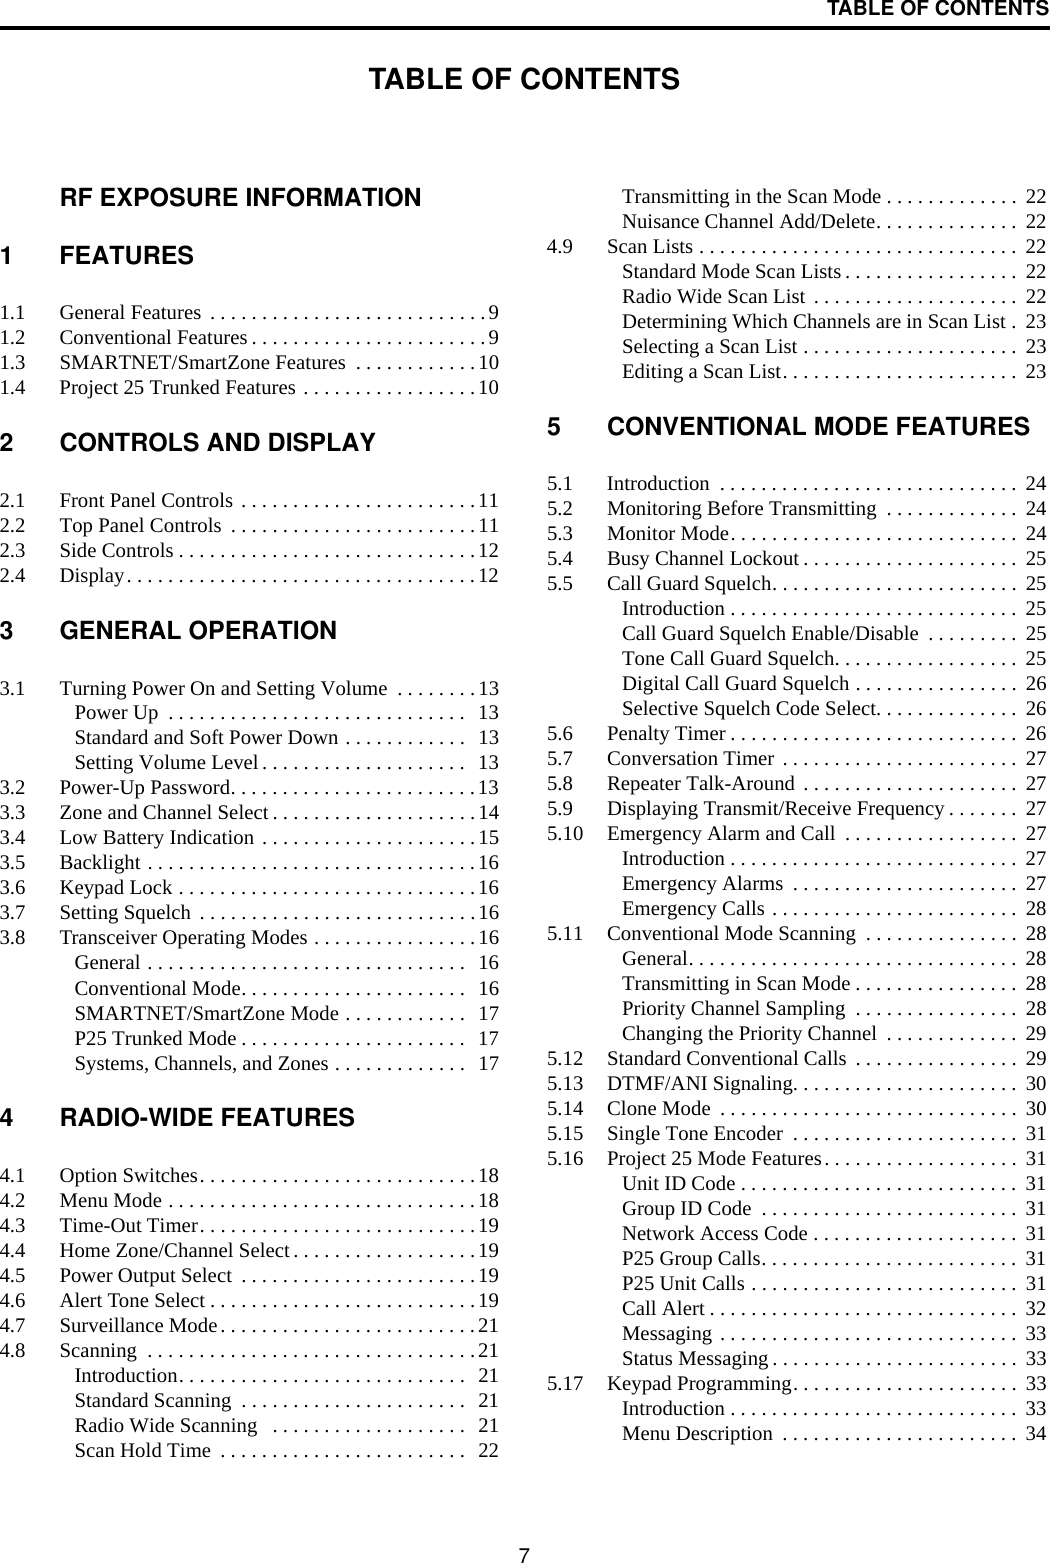 7TABLE OF CONTENTSTABLE OF CONTENTSRF EXPOSURE INFORMATION1 FEATURES1.1 General Features  . . . . . . . . . . . . . . . . . . . . . . . . . . . 91.2 Conventional Features . . . . . . . . . . . . . . . . . . . . . . .91.3 SMARTNET/SmartZone Features  . . . . . . . . . . . .101.4 Project 25 Trunked Features . . . . . . . . . . . . . . . . .102 CONTROLS AND DISPLAY2.1 Front Panel Controls . . . . . . . . . . . . . . . . . . . . . . .112.2 Top Panel Controls  . . . . . . . . . . . . . . . . . . . . . . . .112.3 Side Controls . . . . . . . . . . . . . . . . . . . . . . . . . . . . .122.4 Display. . . . . . . . . . . . . . . . . . . . . . . . . . . . . . . . . .123 GENERAL OPERATION3.1 Turning Power On and Setting Volume  . . . . . . . .13Power Up  . . . . . . . . . . . . . . . . . . . . . . . . . . . . .  13Standard and Soft Power Down . . . . . . . . . . . .  13Setting Volume Level . . . . . . . . . . . . . . . . . . . .  133.2 Power-Up Password. . . . . . . . . . . . . . . . . . . . . . . .133.3 Zone and Channel Select . . . . . . . . . . . . . . . . . . . .143.4 Low Battery Indication . . . . . . . . . . . . . . . . . . . . .153.5 Backlight . . . . . . . . . . . . . . . . . . . . . . . . . . . . . . . .163.6 Keypad Lock . . . . . . . . . . . . . . . . . . . . . . . . . . . . .163.7 Setting Squelch  . . . . . . . . . . . . . . . . . . . . . . . . . . .163.8 Transceiver Operating Modes . . . . . . . . . . . . . . . .16General . . . . . . . . . . . . . . . . . . . . . . . . . . . . . . .   16Conventional Mode. . . . . . . . . . . . . . . . . . . . . .  16SMARTNET/SmartZone Mode . . . . . . . . . . . .  17P25 Trunked Mode . . . . . . . . . . . . . . . . . . . . . .  17Systems, Channels, and Zones . . . . . . . . . . . . .  174 RADIO-WIDE FEATURES4.1 Option Switches. . . . . . . . . . . . . . . . . . . . . . . . . . .184.2 Menu Mode . . . . . . . . . . . . . . . . . . . . . . . . . . . . . .184.3 Time-Out Timer. . . . . . . . . . . . . . . . . . . . . . . . . . .194.4 Home Zone/Channel Select . . . . . . . . . . . . . . . . . .194.5 Power Output Select  . . . . . . . . . . . . . . . . . . . . . . .194.6 Alert Tone Select . . . . . . . . . . . . . . . . . . . . . . . . . .194.7 Surveillance Mode. . . . . . . . . . . . . . . . . . . . . . . . .214.8 Scanning  . . . . . . . . . . . . . . . . . . . . . . . . . . . . . . . .21Introduction. . . . . . . . . . . . . . . . . . . . . . . . . . . .  21Standard Scanning  . . . . . . . . . . . . . . . . . . . . . .  21Radio Wide Scanning   . . . . . . . . . . . . . . . . . . .   21Scan Hold Time  . . . . . . . . . . . . . . . . . . . . . . . .  22Transmitting in the Scan Mode . . . . . . . . . . . . .  22Nuisance Channel Add/Delete. . . . . . . . . . . . . .  224.9 Scan Lists . . . . . . . . . . . . . . . . . . . . . . . . . . . . . . .  22Standard Mode Scan Lists . . . . . . . . . . . . . . . . .  22Radio Wide Scan List . . . . . . . . . . . . . . . . . . . .  22Determining Which Channels are in Scan List .  23Selecting a Scan List . . . . . . . . . . . . . . . . . . . . .  23Editing a Scan List. . . . . . . . . . . . . . . . . . . . . . .  235 CONVENTIONAL MODE FEATURES5.1 Introduction  . . . . . . . . . . . . . . . . . . . . . . . . . . . . .  245.2 Monitoring Before Transmitting  . . . . . . . . . . . . .  245.3 Monitor Mode. . . . . . . . . . . . . . . . . . . . . . . . . . . .  245.4 Busy Channel Lockout . . . . . . . . . . . . . . . . . . . . .  255.5 Call Guard Squelch. . . . . . . . . . . . . . . . . . . . . . . .  25Introduction . . . . . . . . . . . . . . . . . . . . . . . . . . . .  25Call Guard Squelch Enable/Disable  . . . . . . . . .  25Tone Call Guard Squelch. . . . . . . . . . . . . . . . . .  25Digital Call Guard Squelch . . . . . . . . . . . . . . . .  26Selective Squelch Code Select. . . . . . . . . . . . . .  265.6 Penalty Timer . . . . . . . . . . . . . . . . . . . . . . . . . . . .  265.7 Conversation Timer . . . . . . . . . . . . . . . . . . . . . . .  275.8 Repeater Talk-Around . . . . . . . . . . . . . . . . . . . . .  275.9 Displaying Transmit/Receive Frequency . . . . . . .  275.10 Emergency Alarm and Call  . . . . . . . . . . . . . . . . .  27Introduction . . . . . . . . . . . . . . . . . . . . . . . . . . . .  27Emergency Alarms  . . . . . . . . . . . . . . . . . . . . . .  27Emergency Calls . . . . . . . . . . . . . . . . . . . . . . . .  285.11 Conventional Mode Scanning  . . . . . . . . . . . . . . .  28General. . . . . . . . . . . . . . . . . . . . . . . . . . . . . . . .  28Transmitting in Scan Mode . . . . . . . . . . . . . . . .  28Priority Channel Sampling  . . . . . . . . . . . . . . . .  28Changing the Priority Channel  . . . . . . . . . . . . .  295.12 Standard Conventional Calls  . . . . . . . . . . . . . . . .  295.13 DTMF/ANI Signaling. . . . . . . . . . . . . . . . . . . . . .  305.14 Clone Mode  . . . . . . . . . . . . . . . . . . . . . . . . . . . . .  305.15 Single Tone Encoder  . . . . . . . . . . . . . . . . . . . . . .  315.16 Project 25 Mode Features. . . . . . . . . . . . . . . . . . .  31Unit ID Code . . . . . . . . . . . . . . . . . . . . . . . . . . .  31Group ID Code  . . . . . . . . . . . . . . . . . . . . . . . . .  31Network Access Code . . . . . . . . . . . . . . . . . . . .  31P25 Group Calls. . . . . . . . . . . . . . . . . . . . . . . . .  31P25 Unit Calls . . . . . . . . . . . . . . . . . . . . . . . . . .  31Call Alert . . . . . . . . . . . . . . . . . . . . . . . . . . . . . .  32Messaging . . . . . . . . . . . . . . . . . . . . . . . . . . . . .  33Status Messaging . . . . . . . . . . . . . . . . . . . . . . . .  335.17 Keypad Programming. . . . . . . . . . . . . . . . . . . . . .  33Introduction . . . . . . . . . . . . . . . . . . . . . . . . . . . .  33Menu Description  . . . . . . . . . . . . . . . . . . . . . . .  34